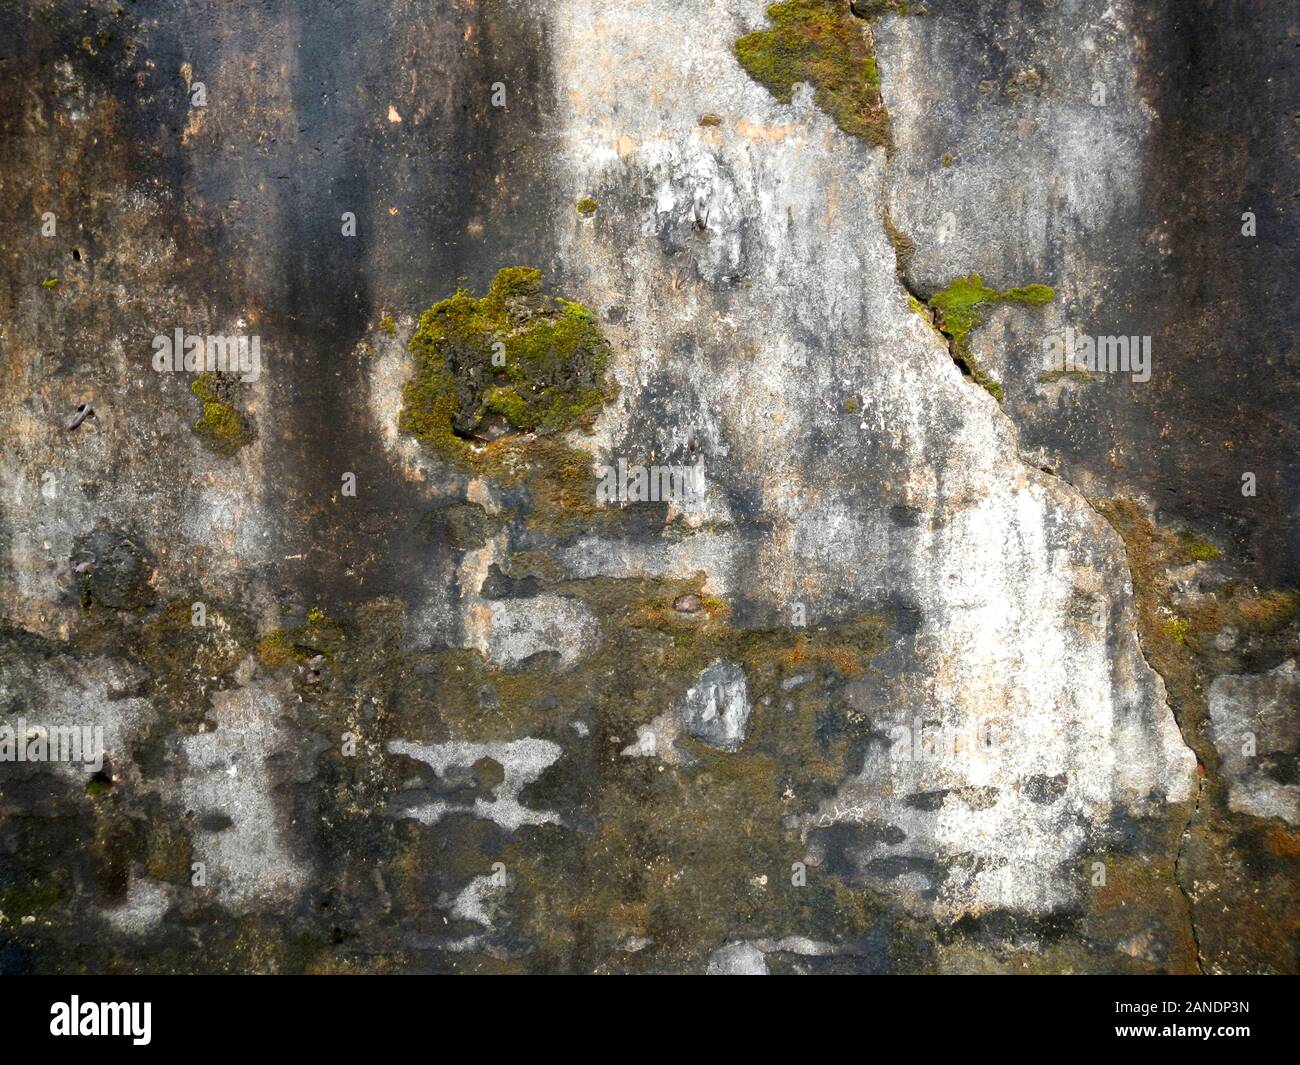 Grunge brickwork wall texture with moss render and bullet holes Stock Photo